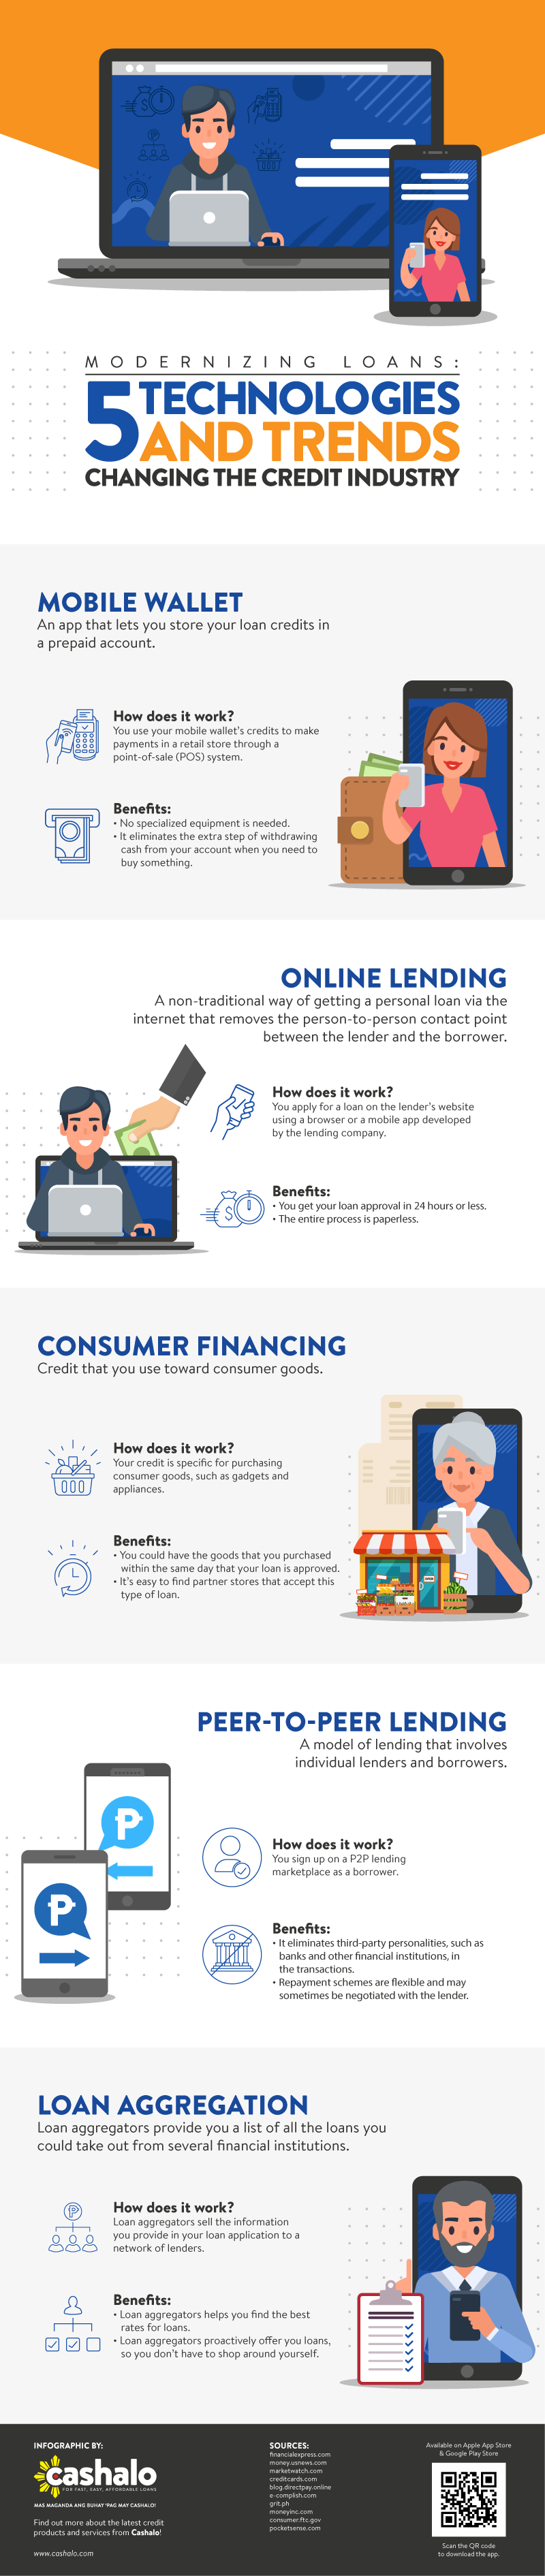 Modernizing Loans: 5 Technologies and Trends Changing the Credit Industry